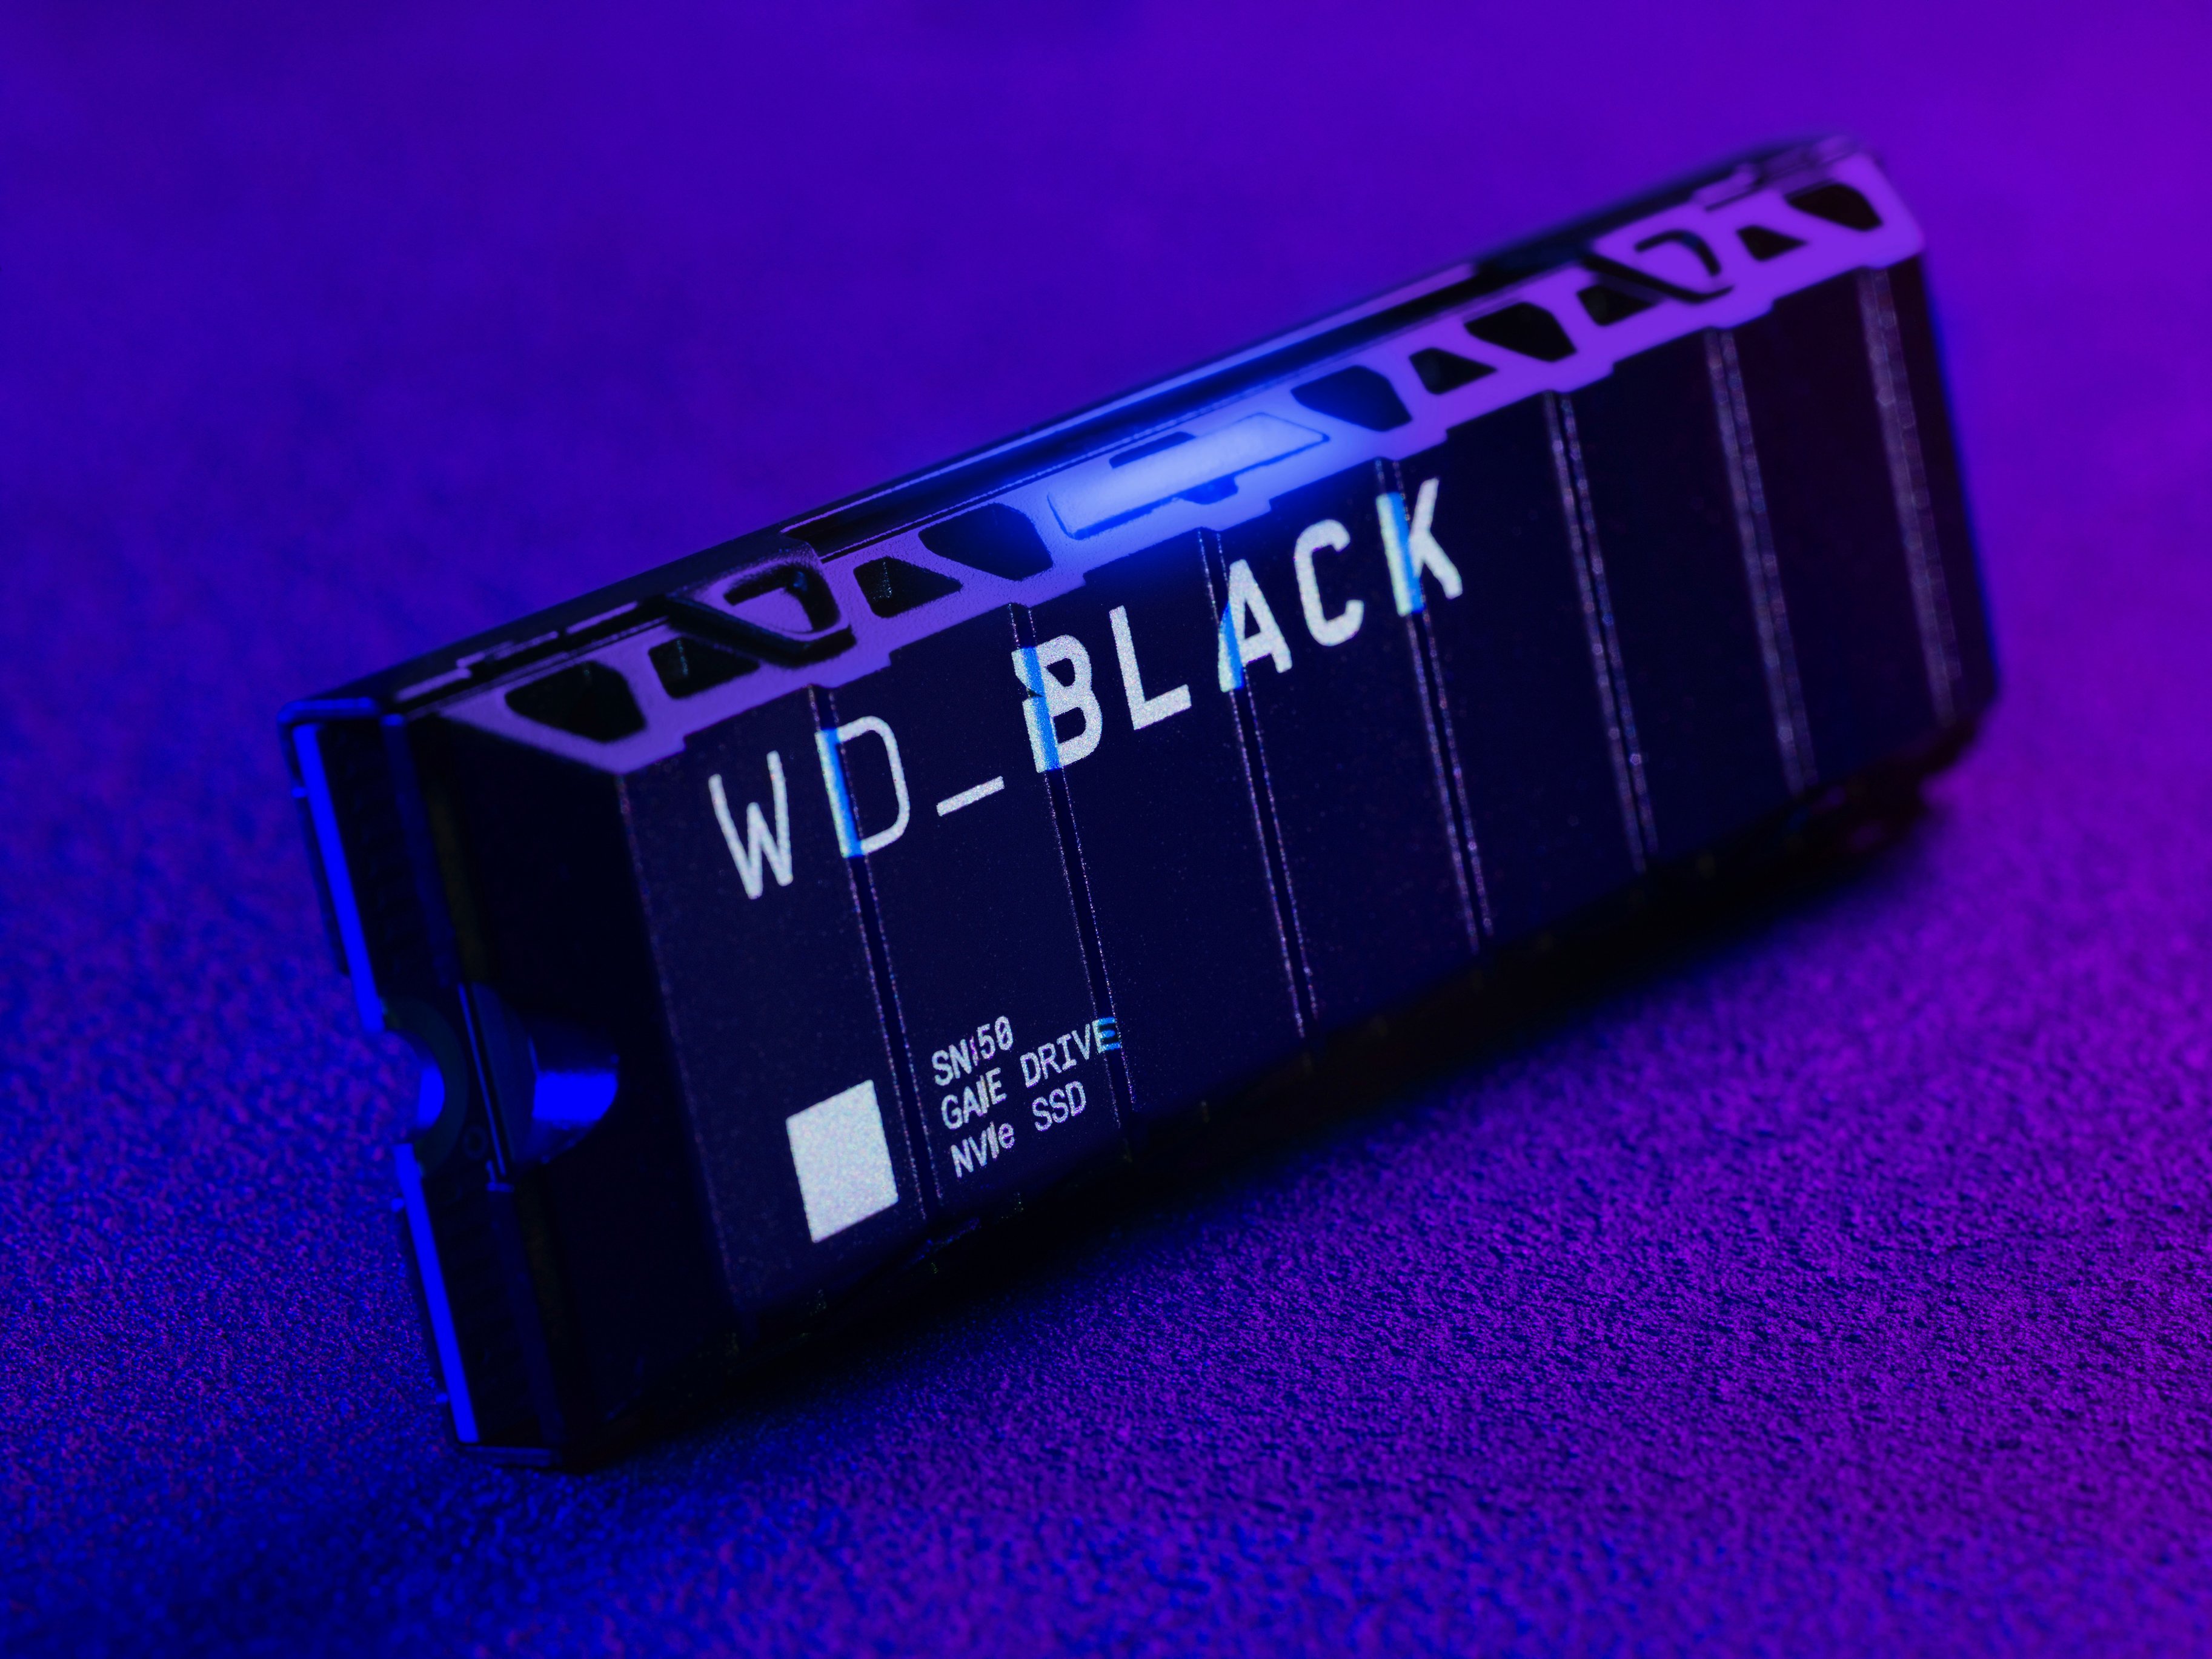  WD_BLACK 1TB SN850 NVMe SSD for PS5 Consoles Solid State Drive  with Heatsink - Gen4 PCIe, M.2 2280, Up to 7,000 MB/s - WDBBKW0010BBK-WRSN  & Playstation DualSense Charging Station